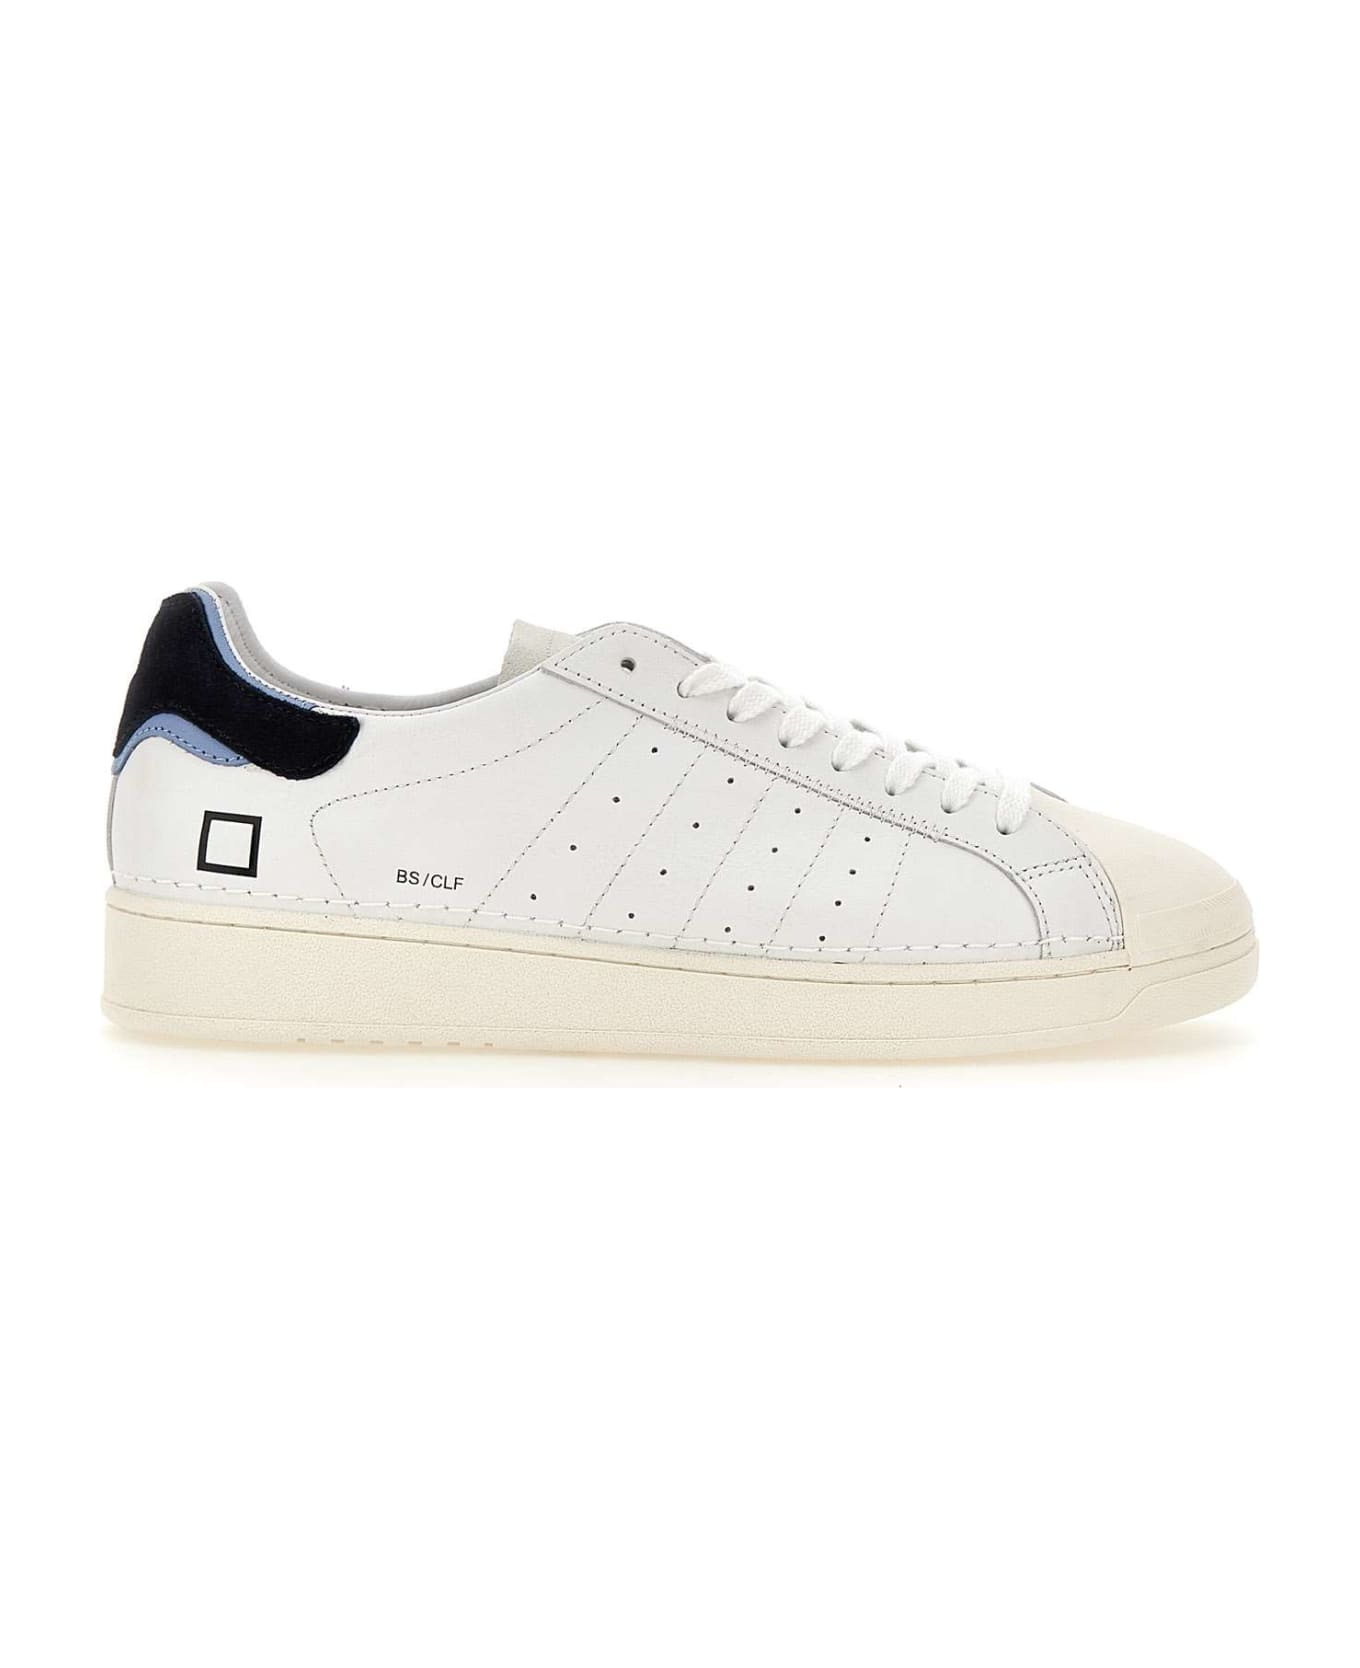 D.A.T.E. "base Calf" Leather Sneakers - WHITE-BLUE スニーカー